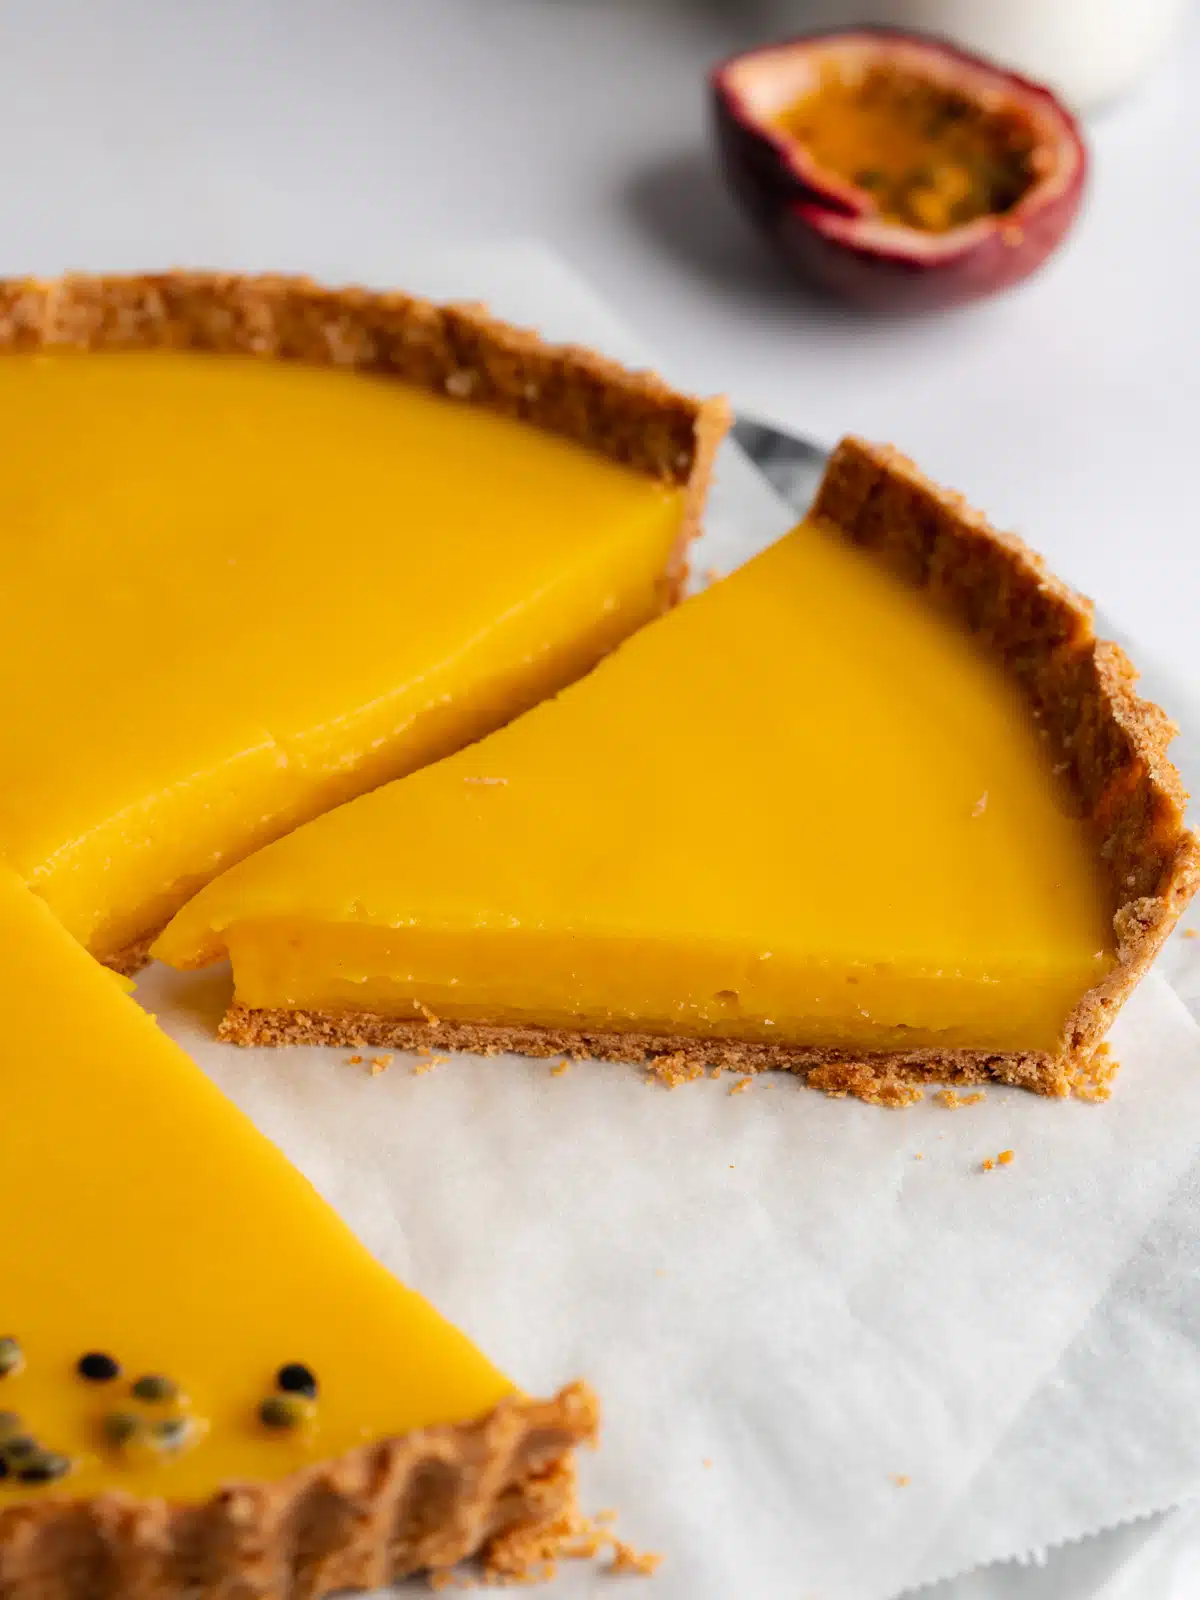 a passion fruit tart that's been sliced into servings.